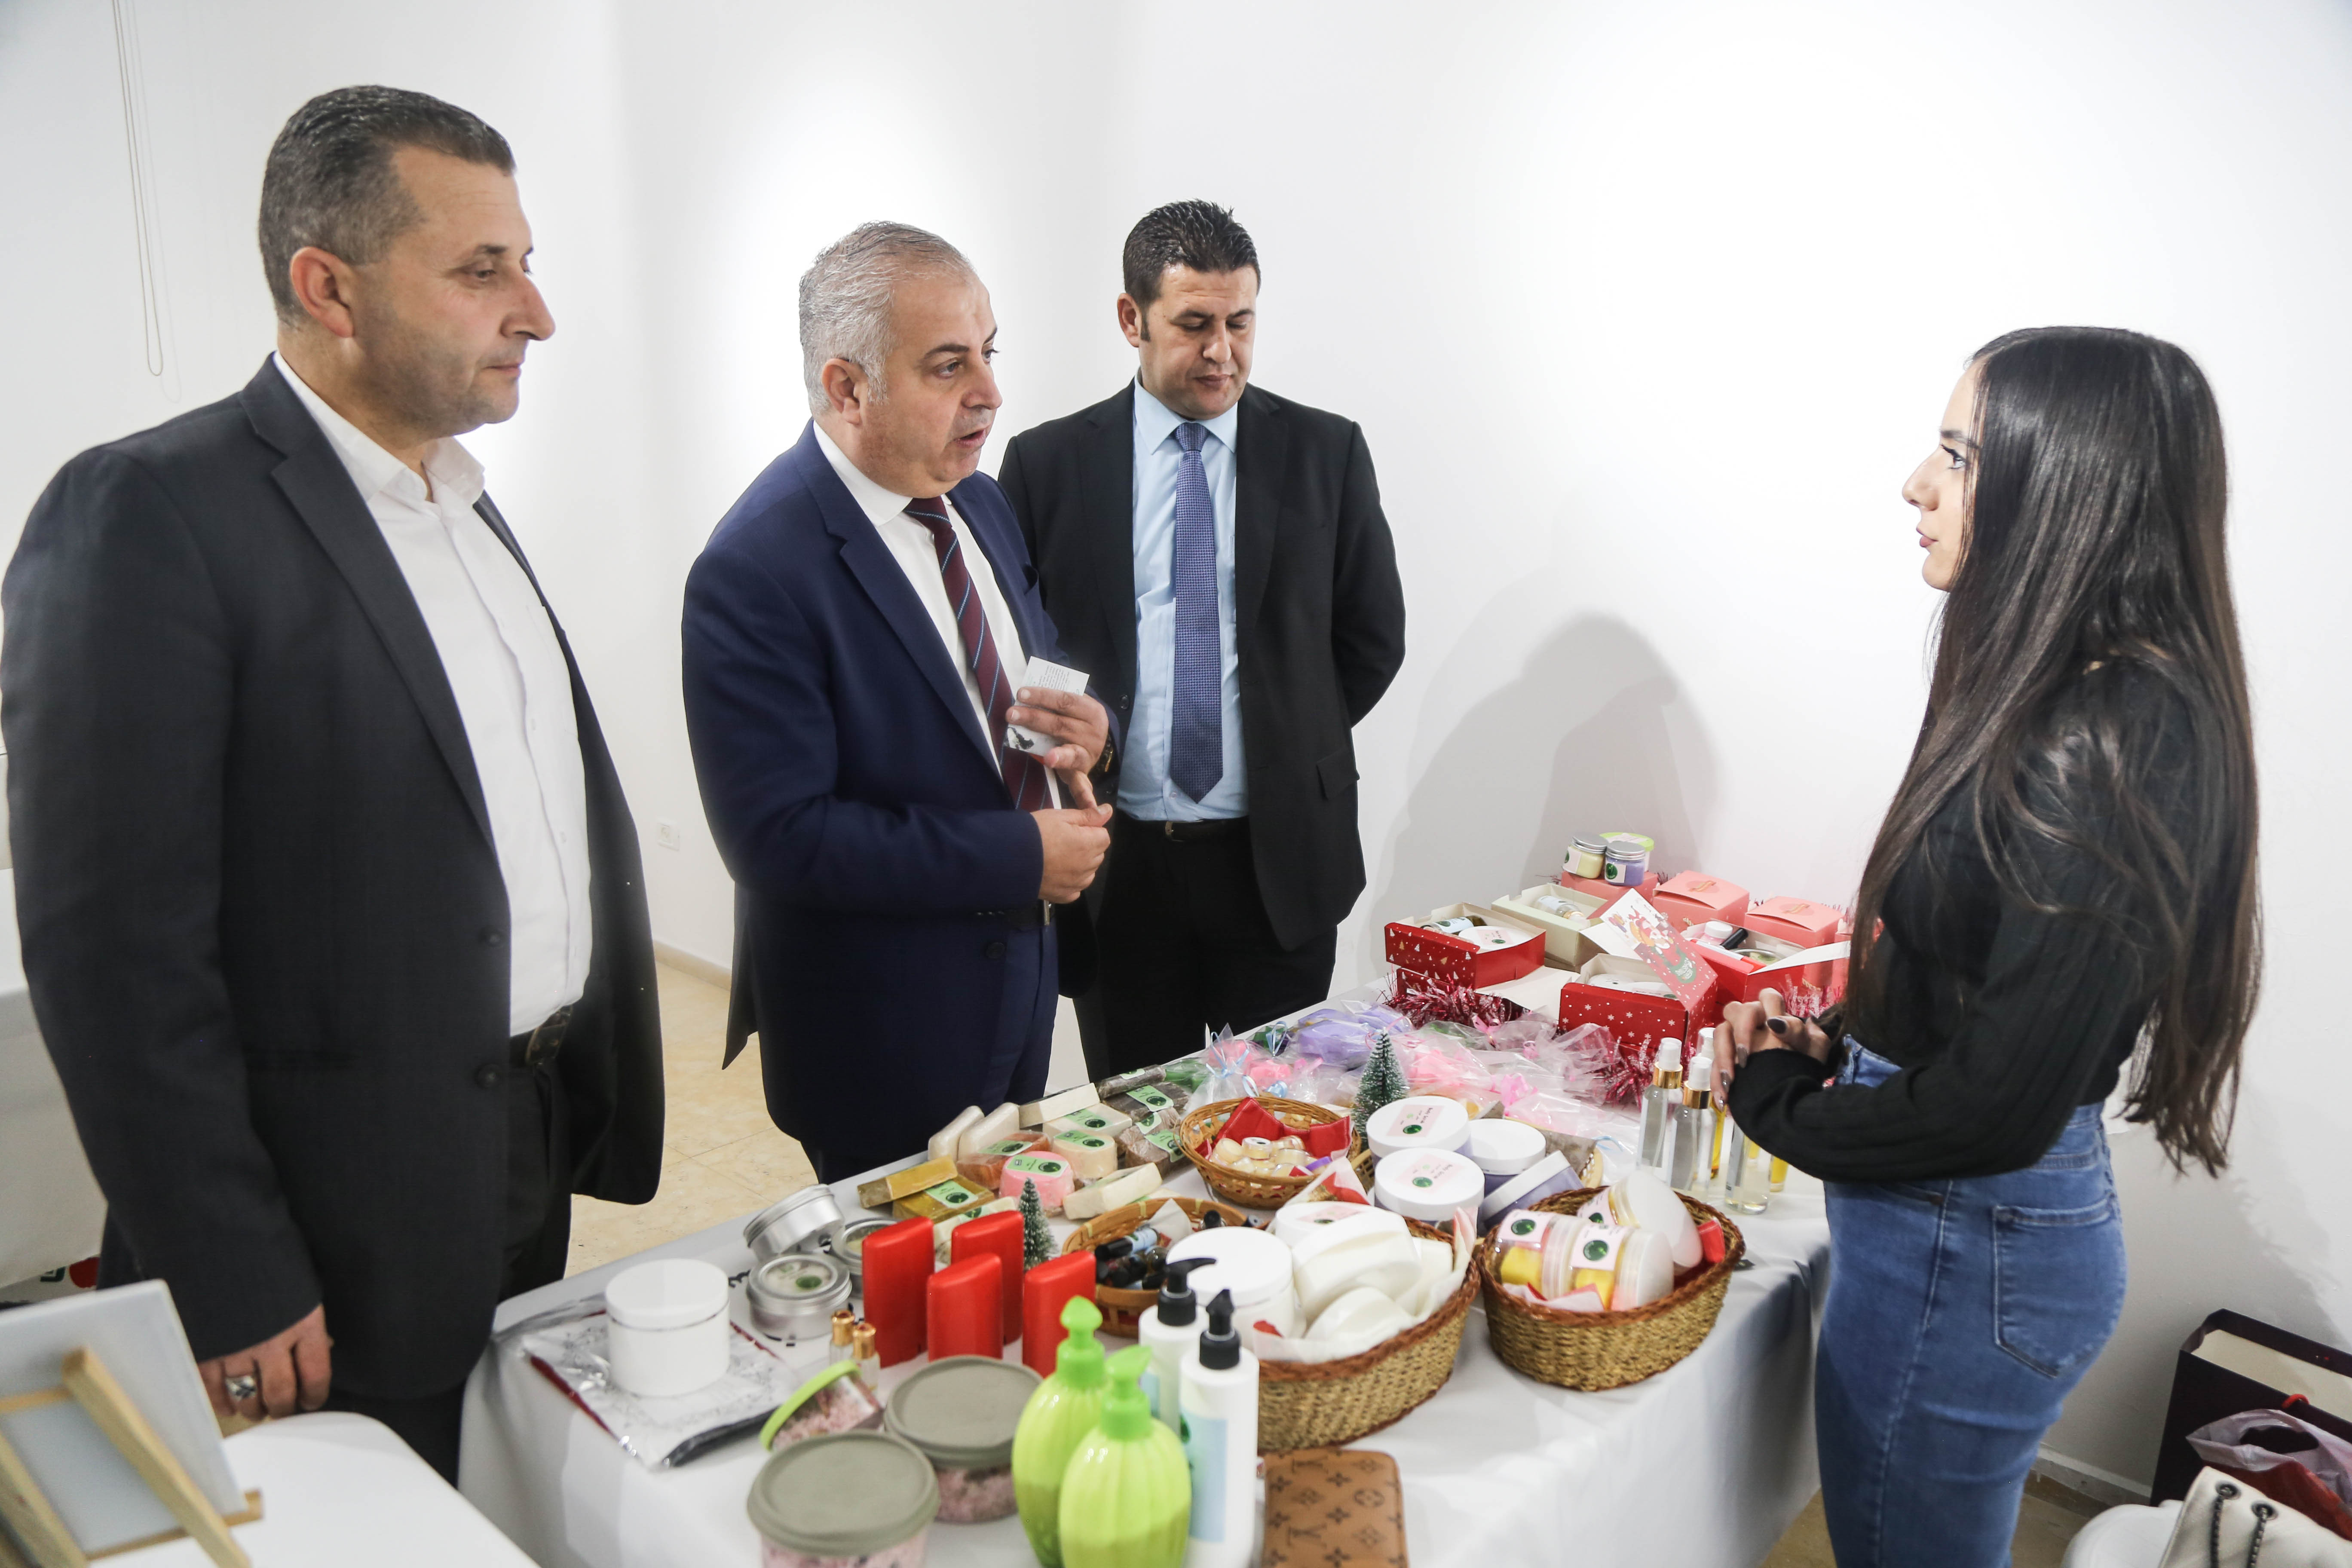 In support of the sustainability of women’s projects in Palestine, Bank of Palestine offers exclusive sponsorship to the activities of the “Second Persistence Bazaar” in Bethlehem